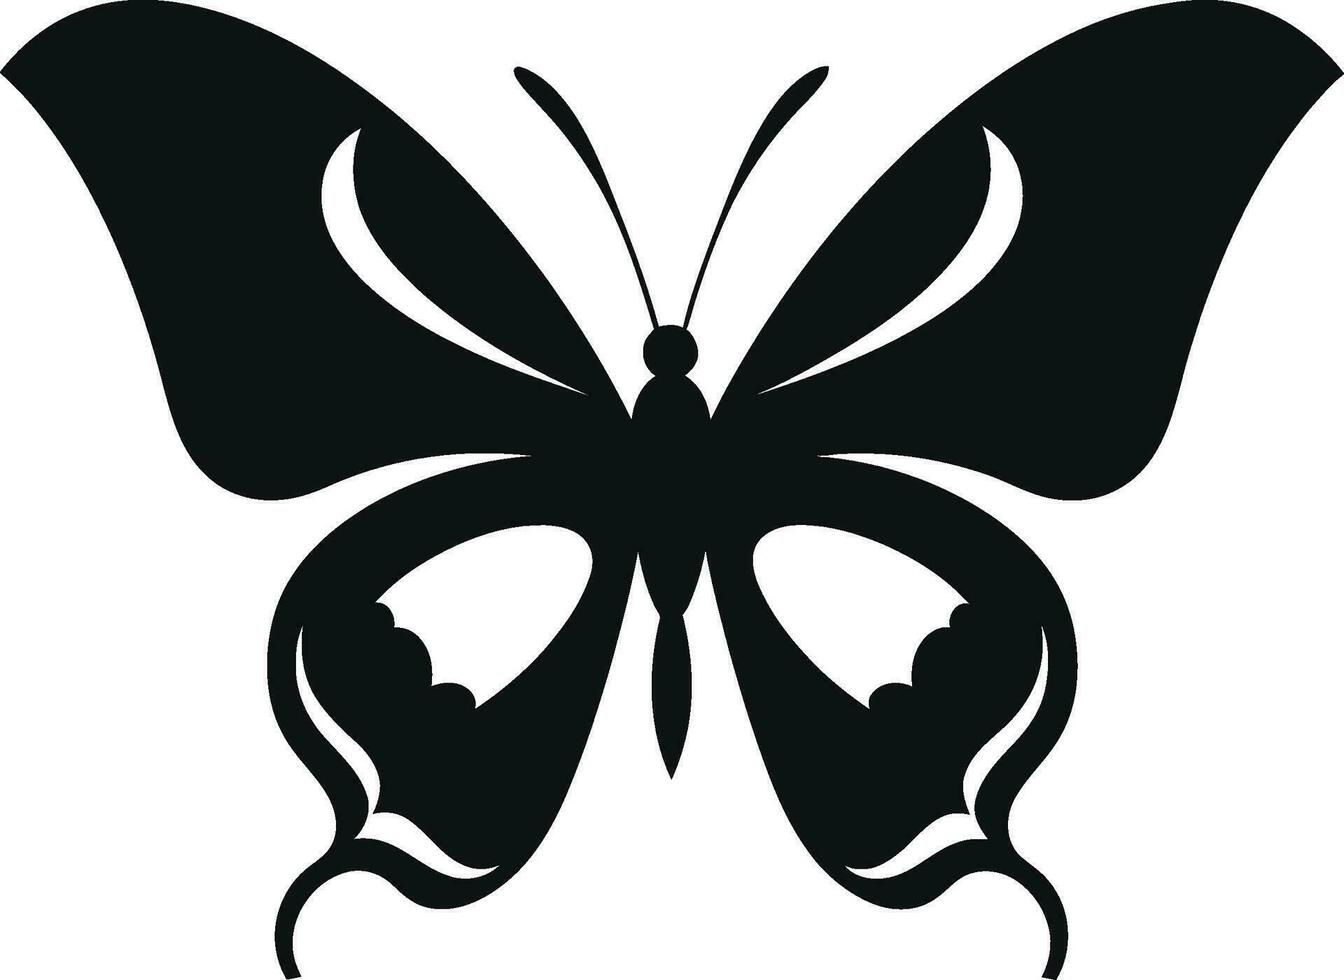 Mystique in Shadows Black Butterfly Icon Black Beauty Takes Flight Butterfly Symbol vector